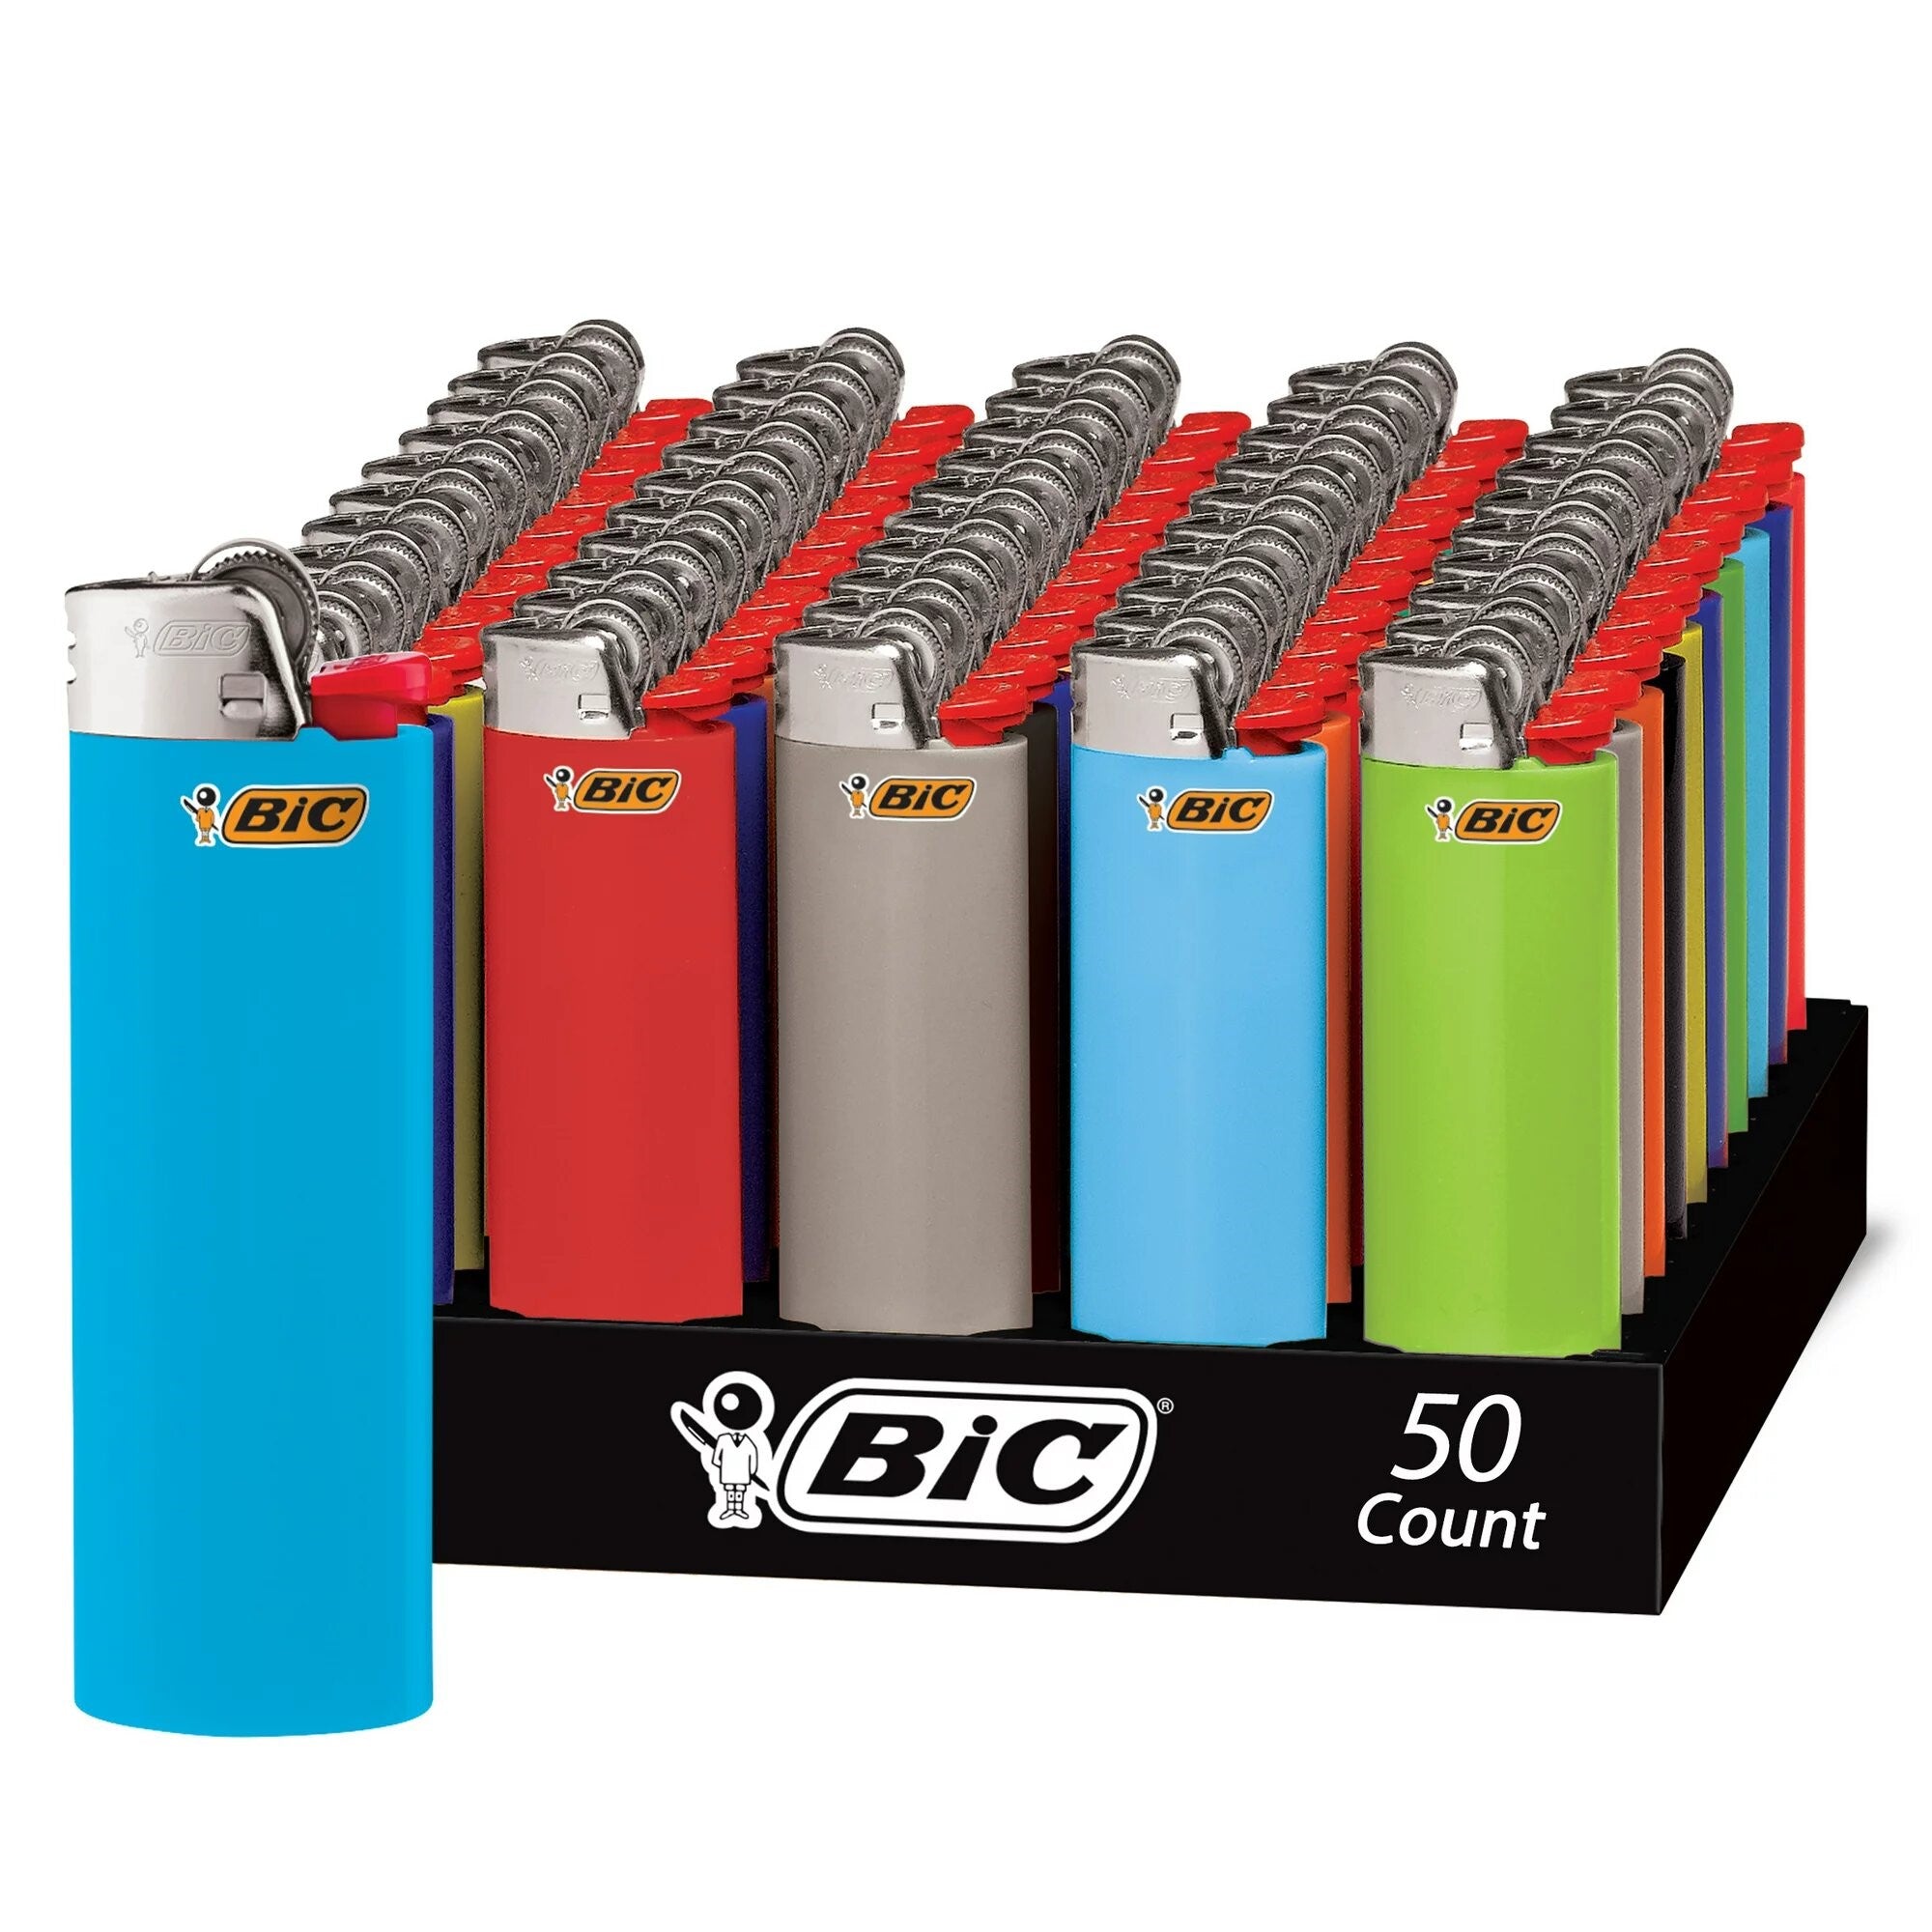 BIC Maxi J6 Pocket Lighters in India, Wholesale tray of 50 lighters